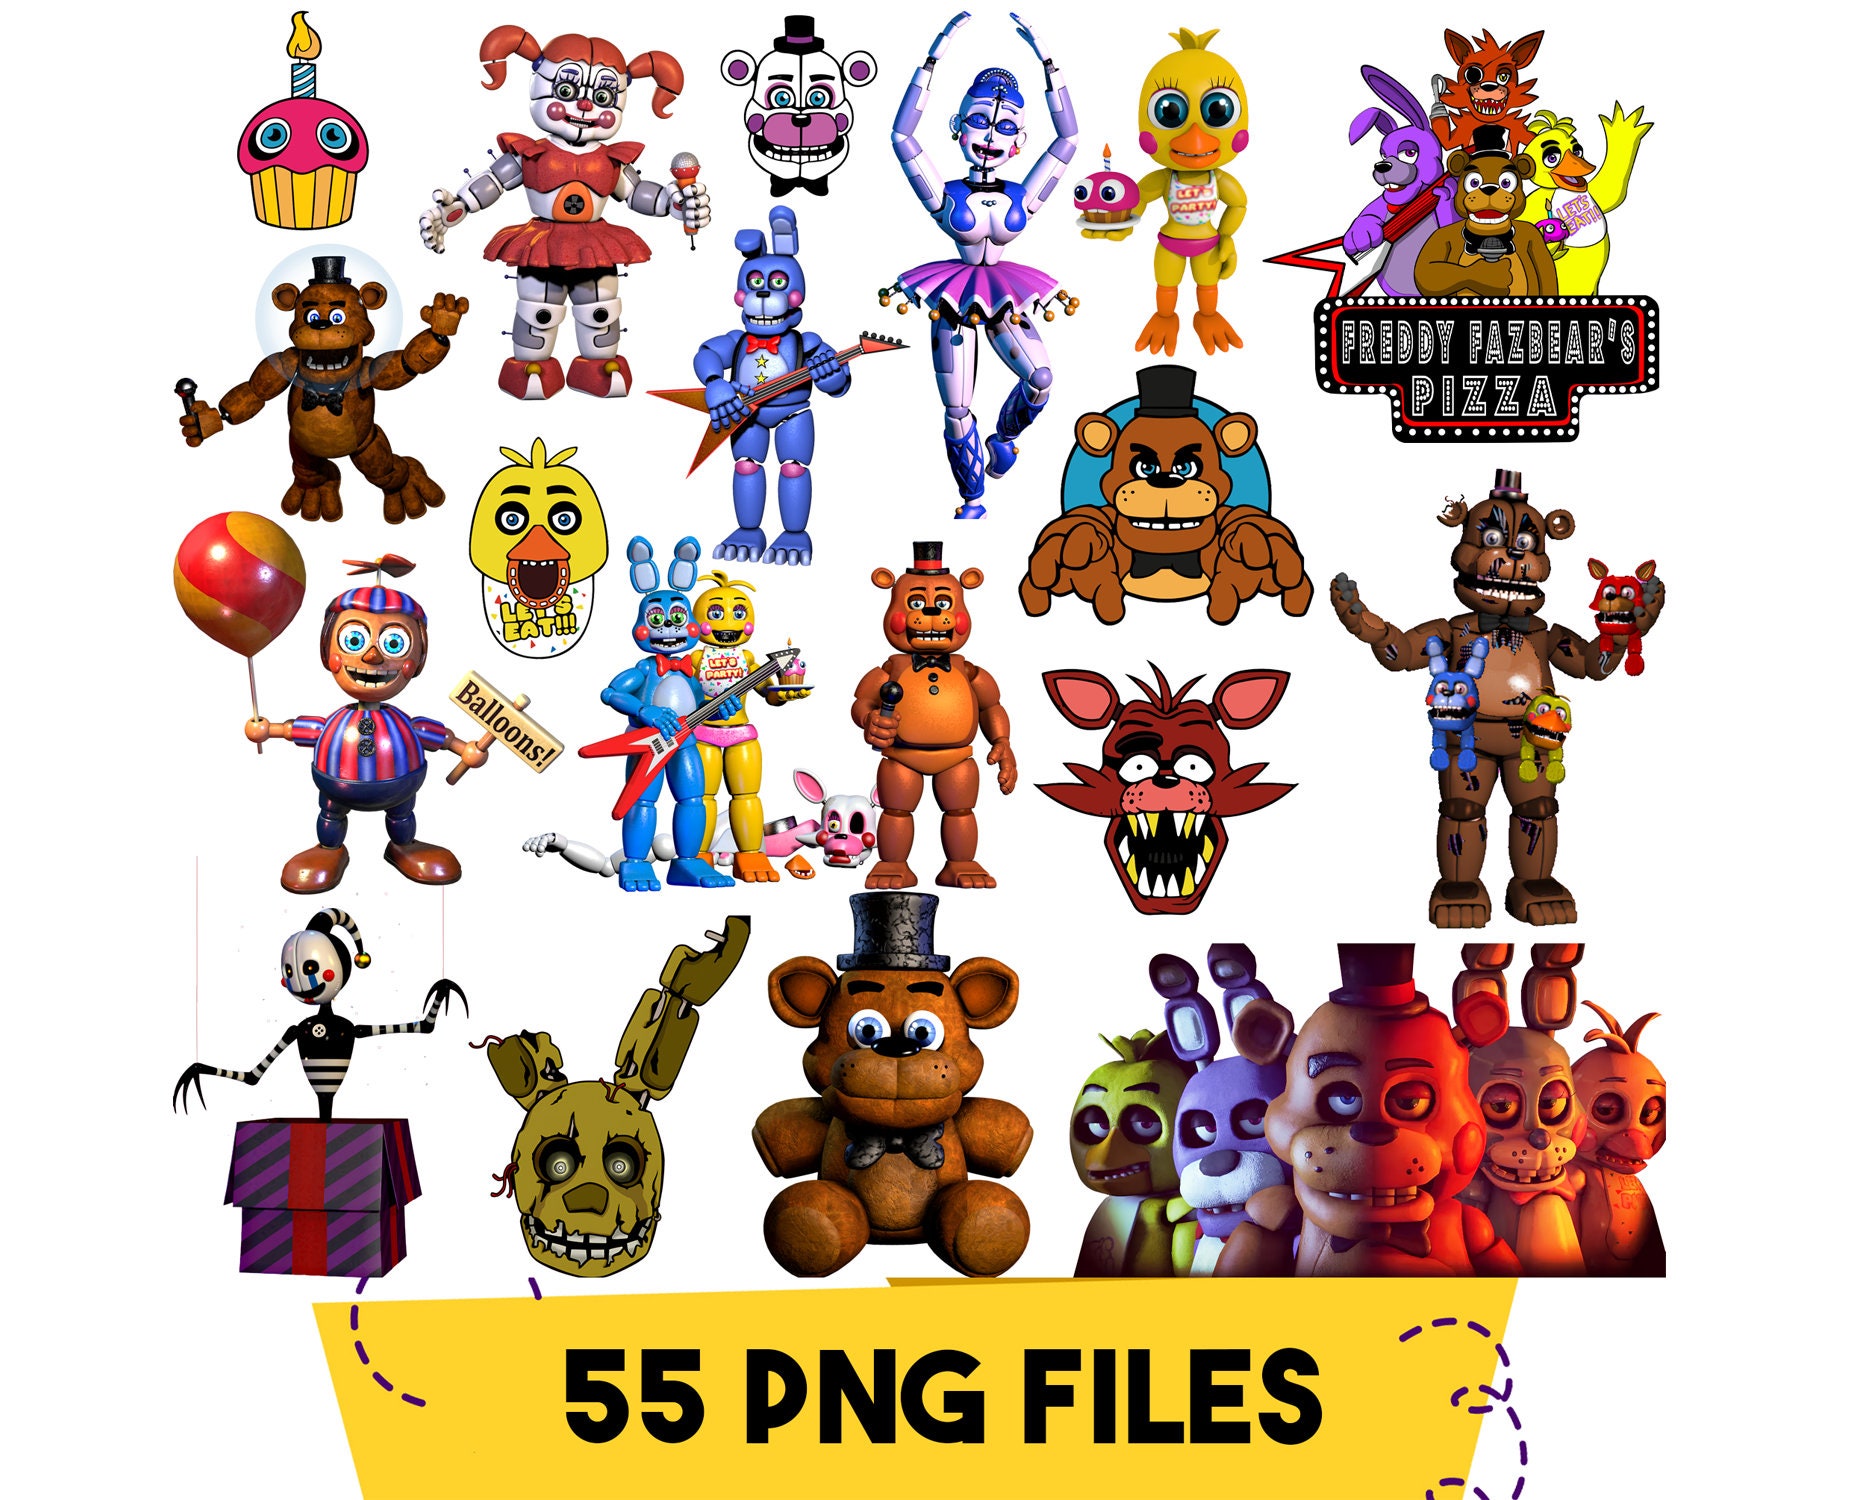 Five Nights at Freddy's Stickers, 50 PCS, Vinyl Waterproof Stickers for  Laptop